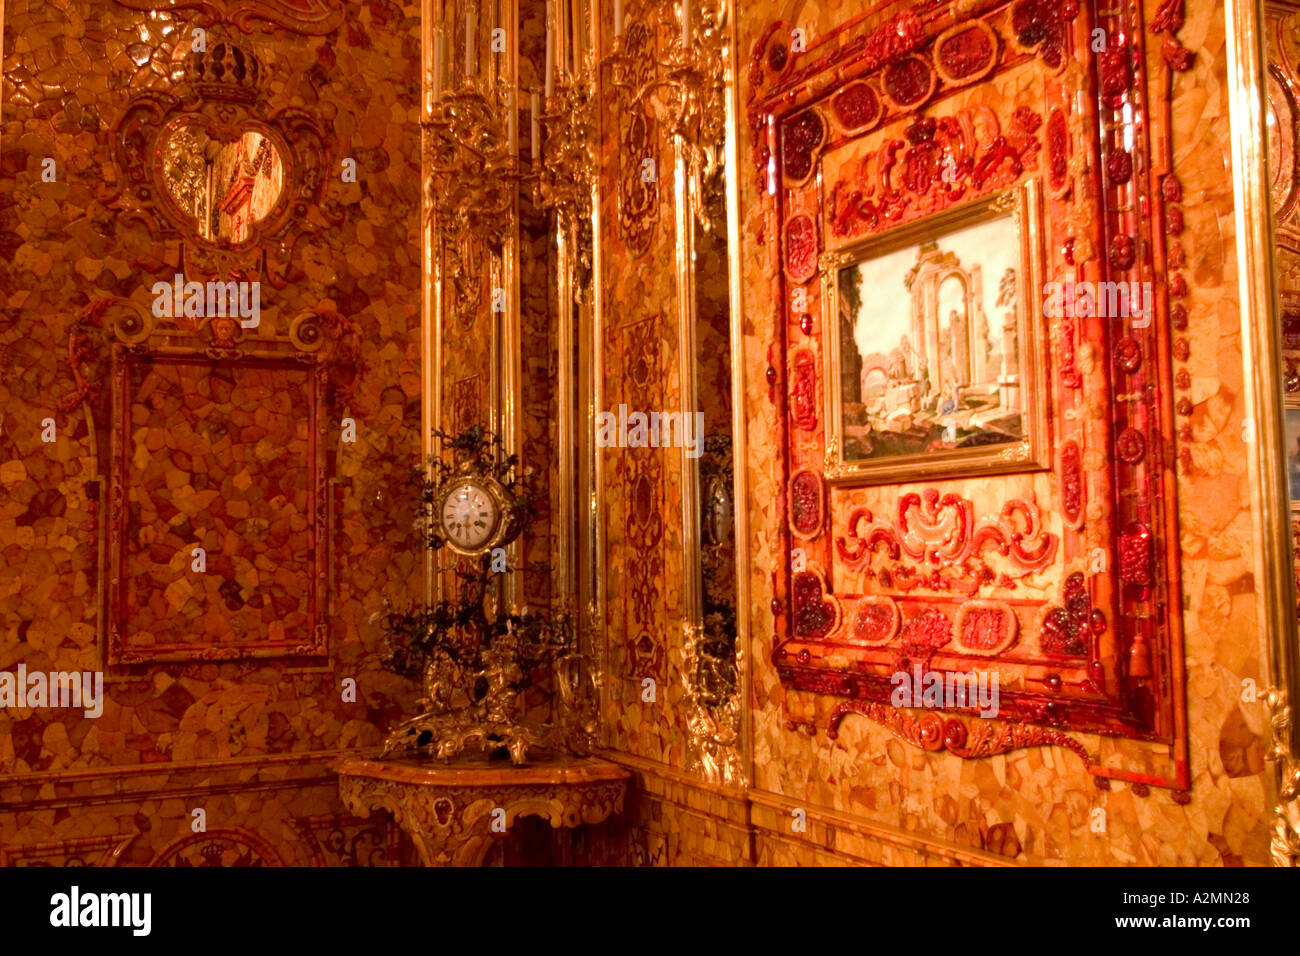 GUS Russia St Petersburg Puschkin Castle Zarskoje Selo Palace of Katharina Amber room Historical Amber Room Picture with Amber Stock Photo